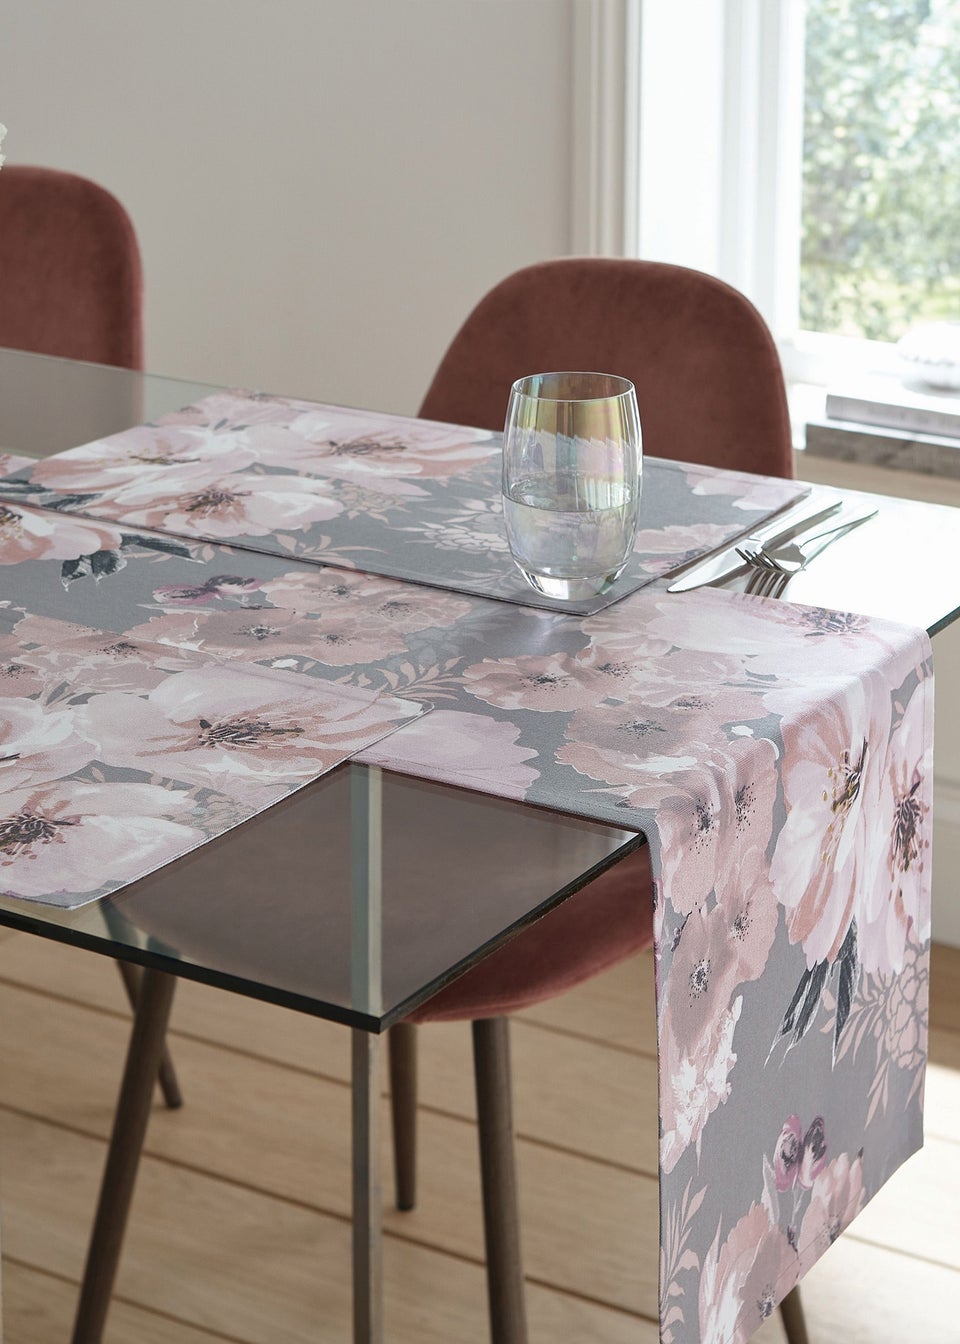 Catherine Lansfield Grey Floral Cotton Dining Placemat 4 Pack (30x46 cm)